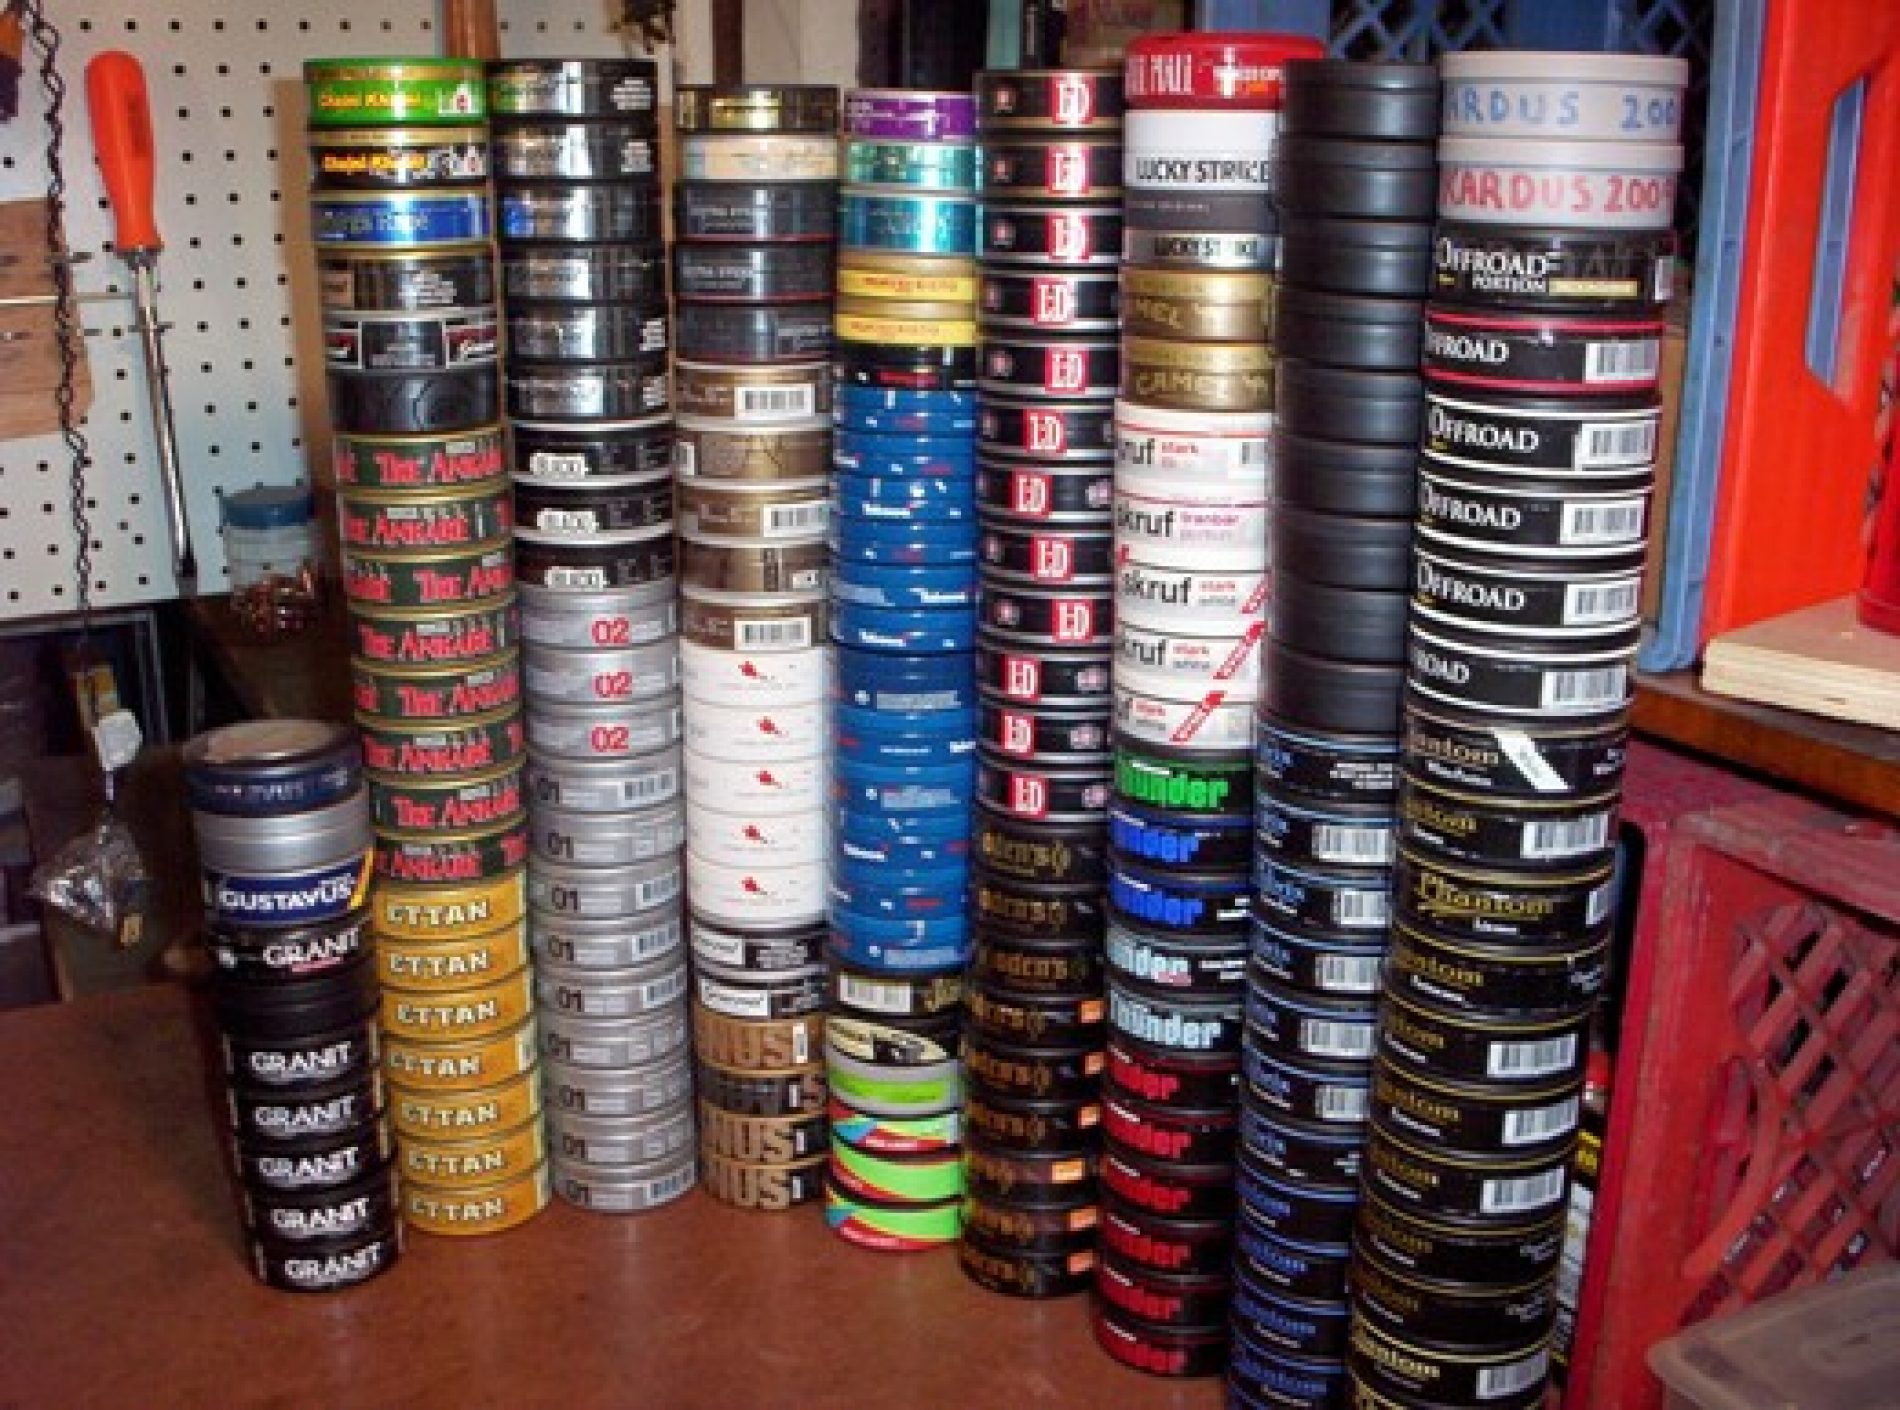 A Year of Snus – a Personal Case Study of 2009